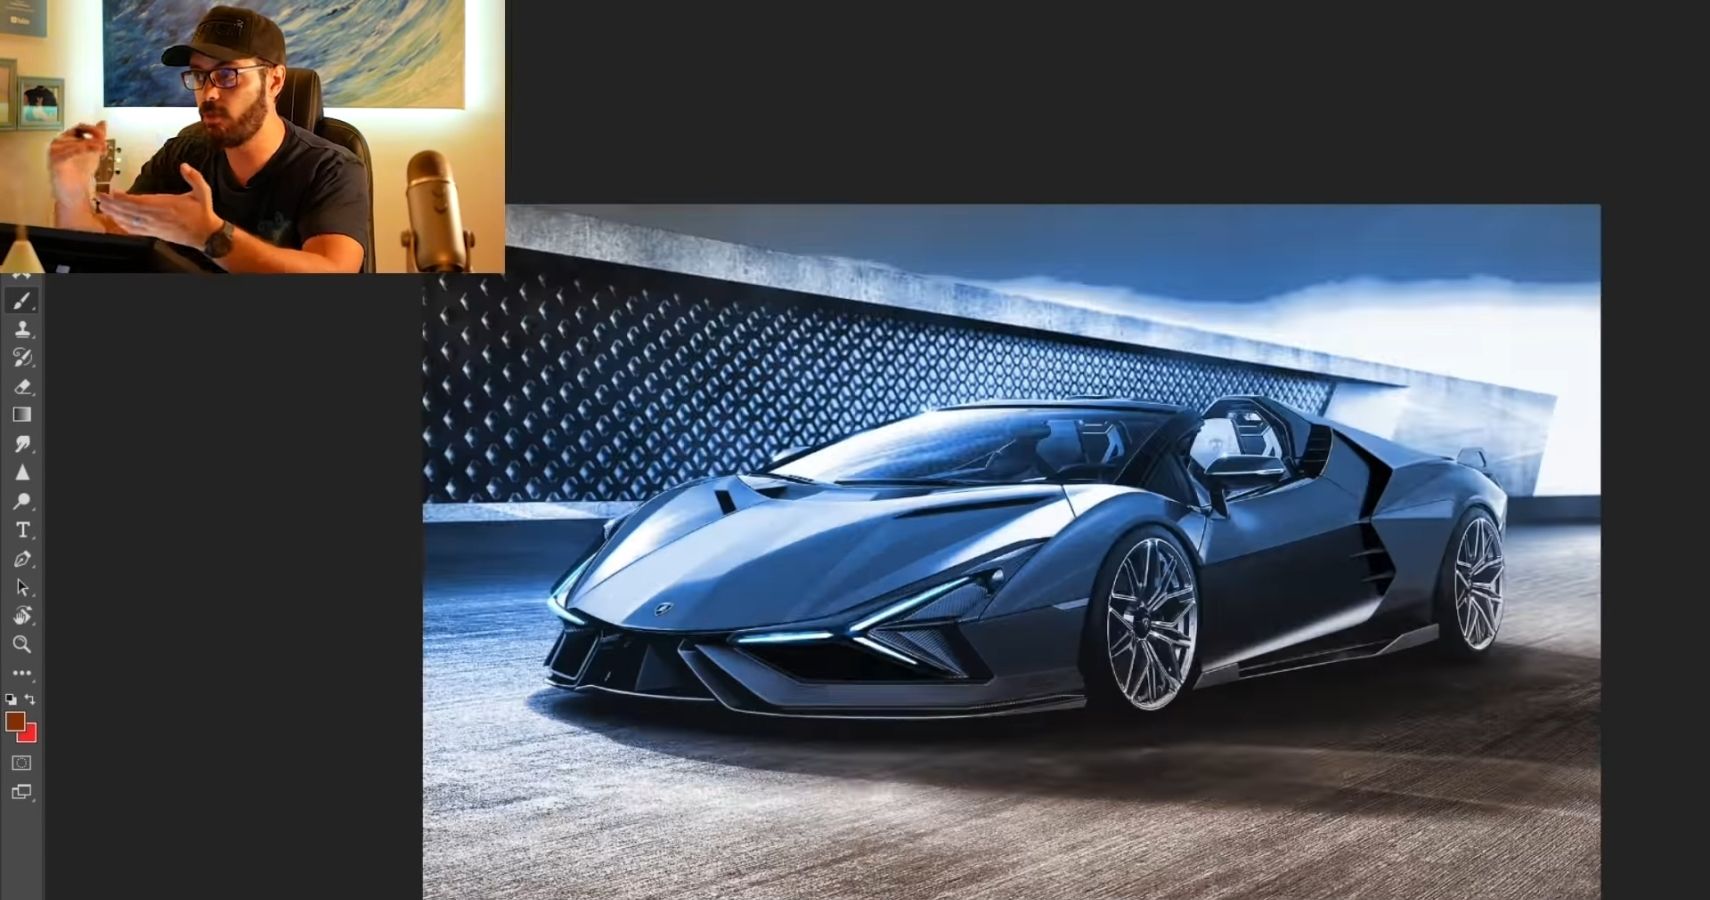 Aventador Replacement Rendering Near Completed Product